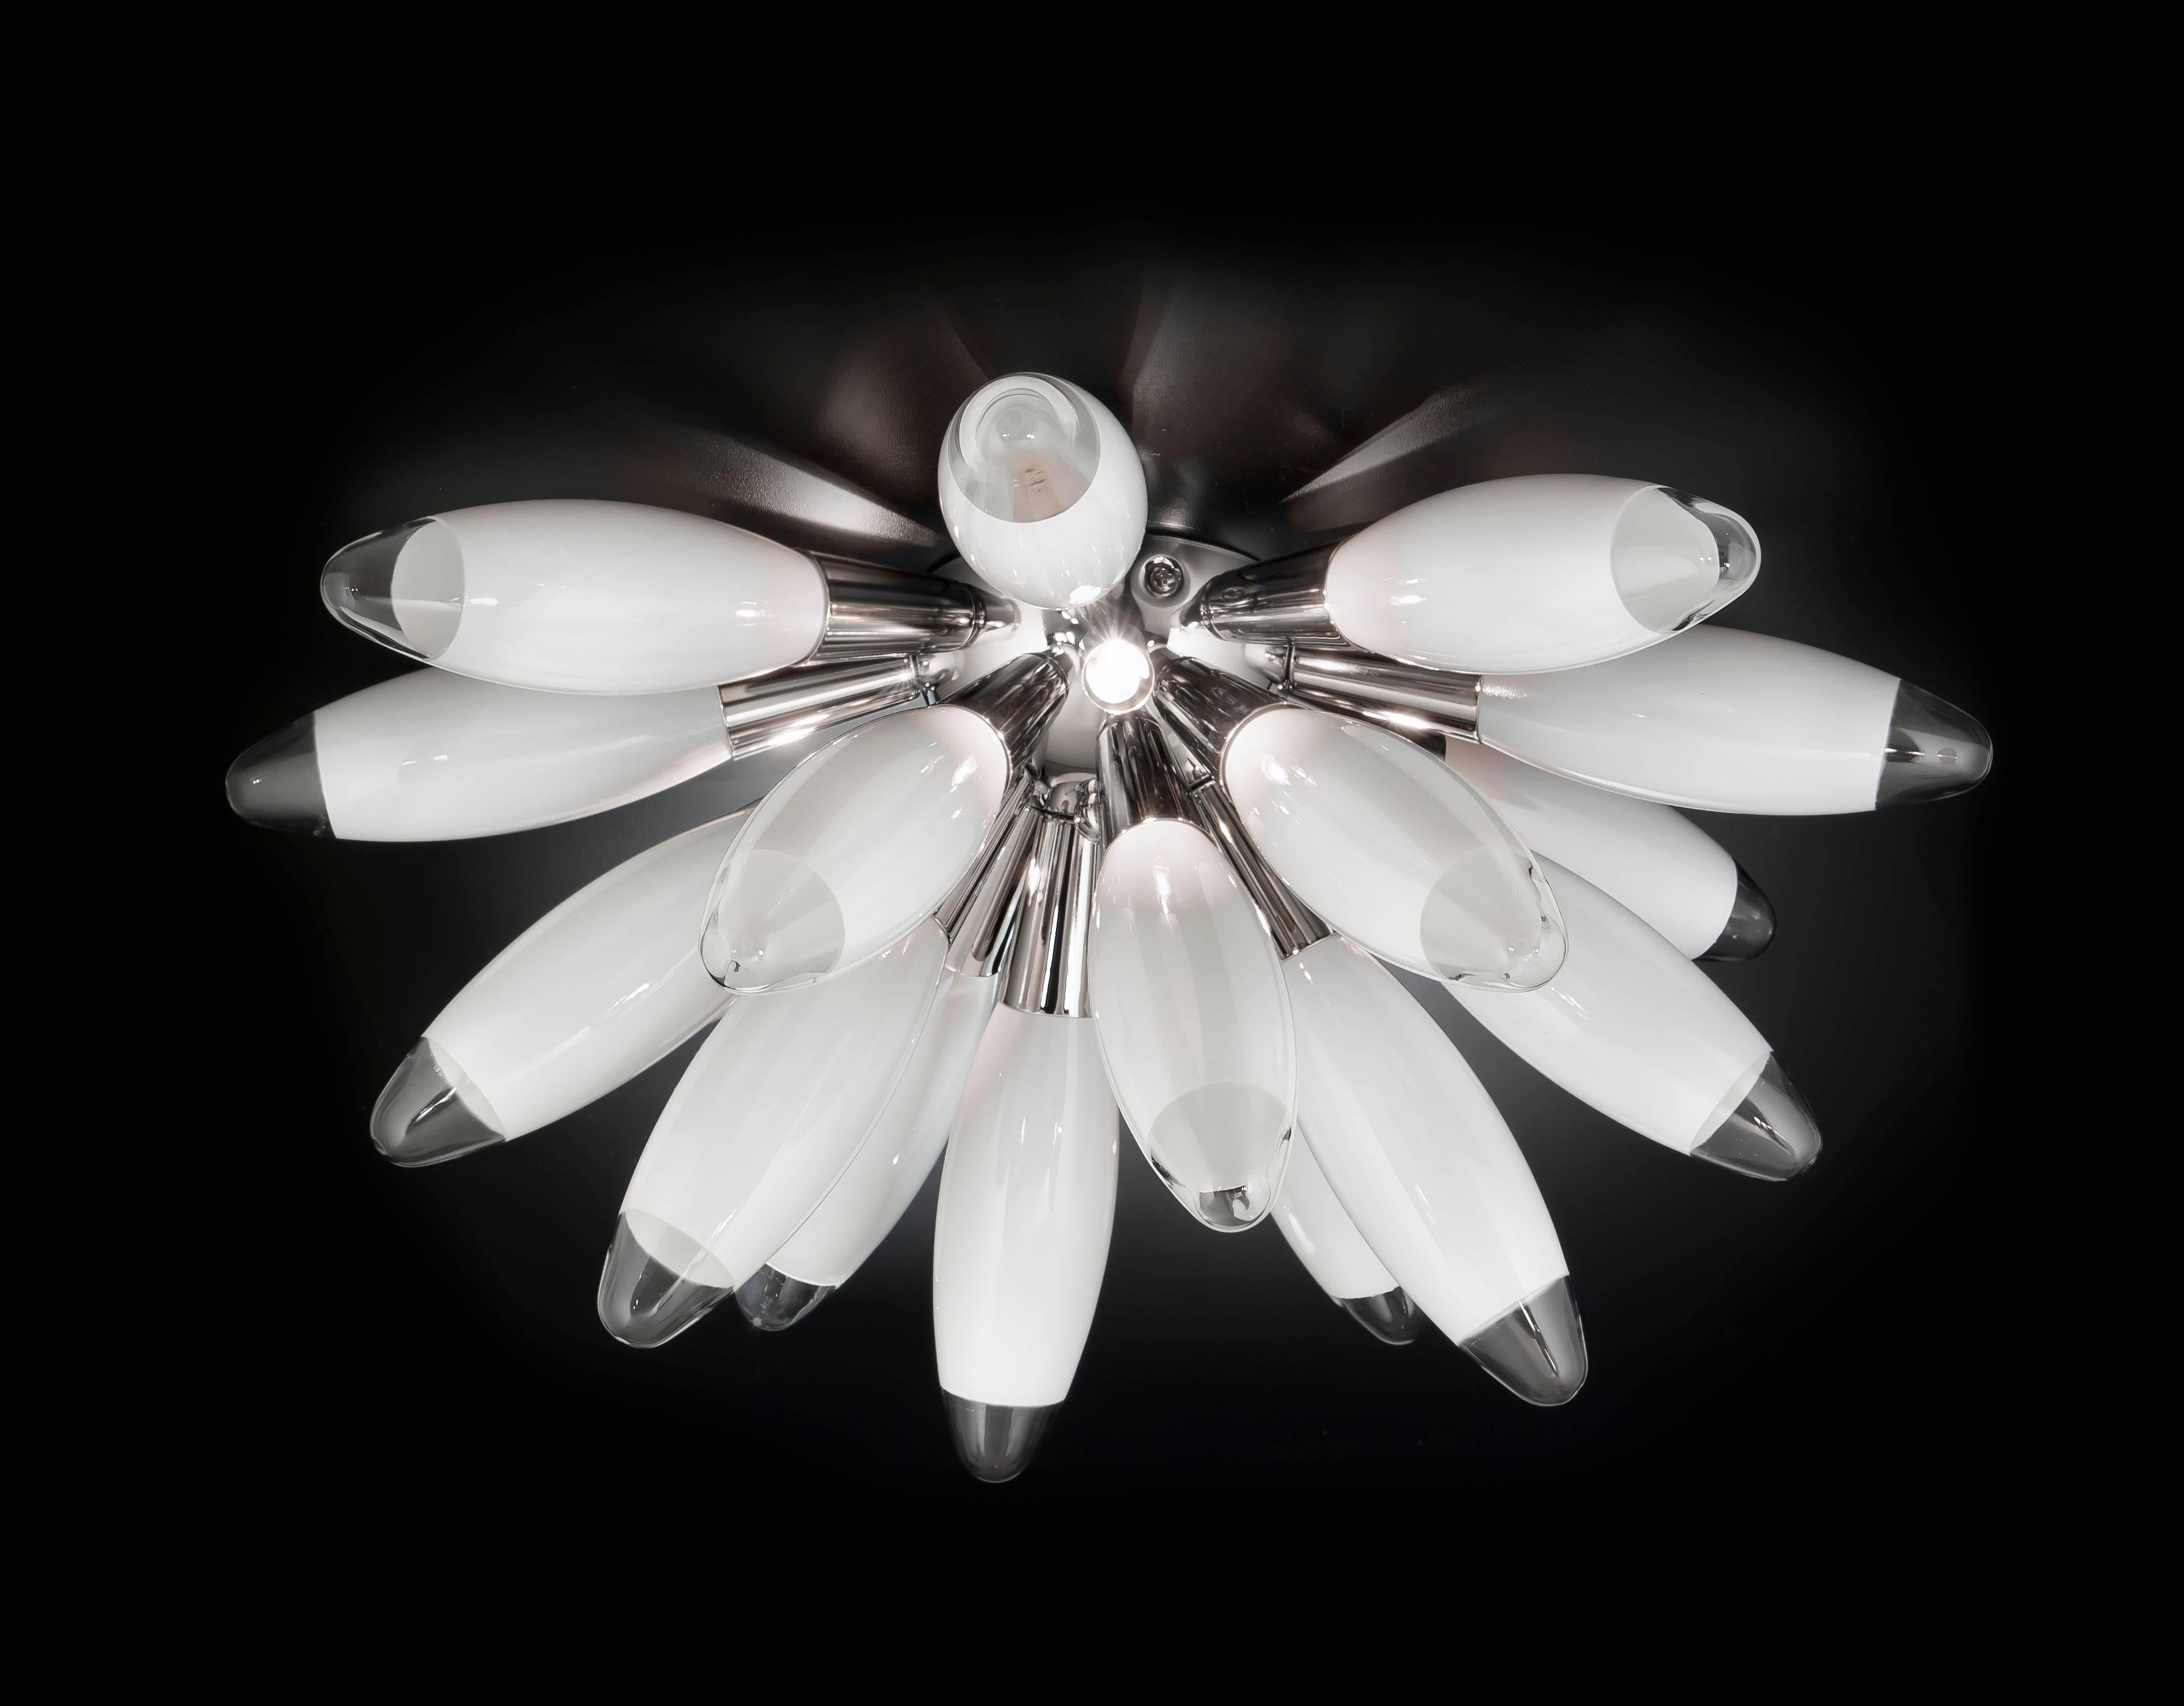 Italian torpedo half sputnik chandelier with 18 white blown glasses, mounted on chrome finish metal frame / Designed by Fabio Bergomi for Fabio Ltd / Made in Italy
3 lights / G9 type / max 40W each
Diameter: 21.5 inches / Height: 10 inches 
Order